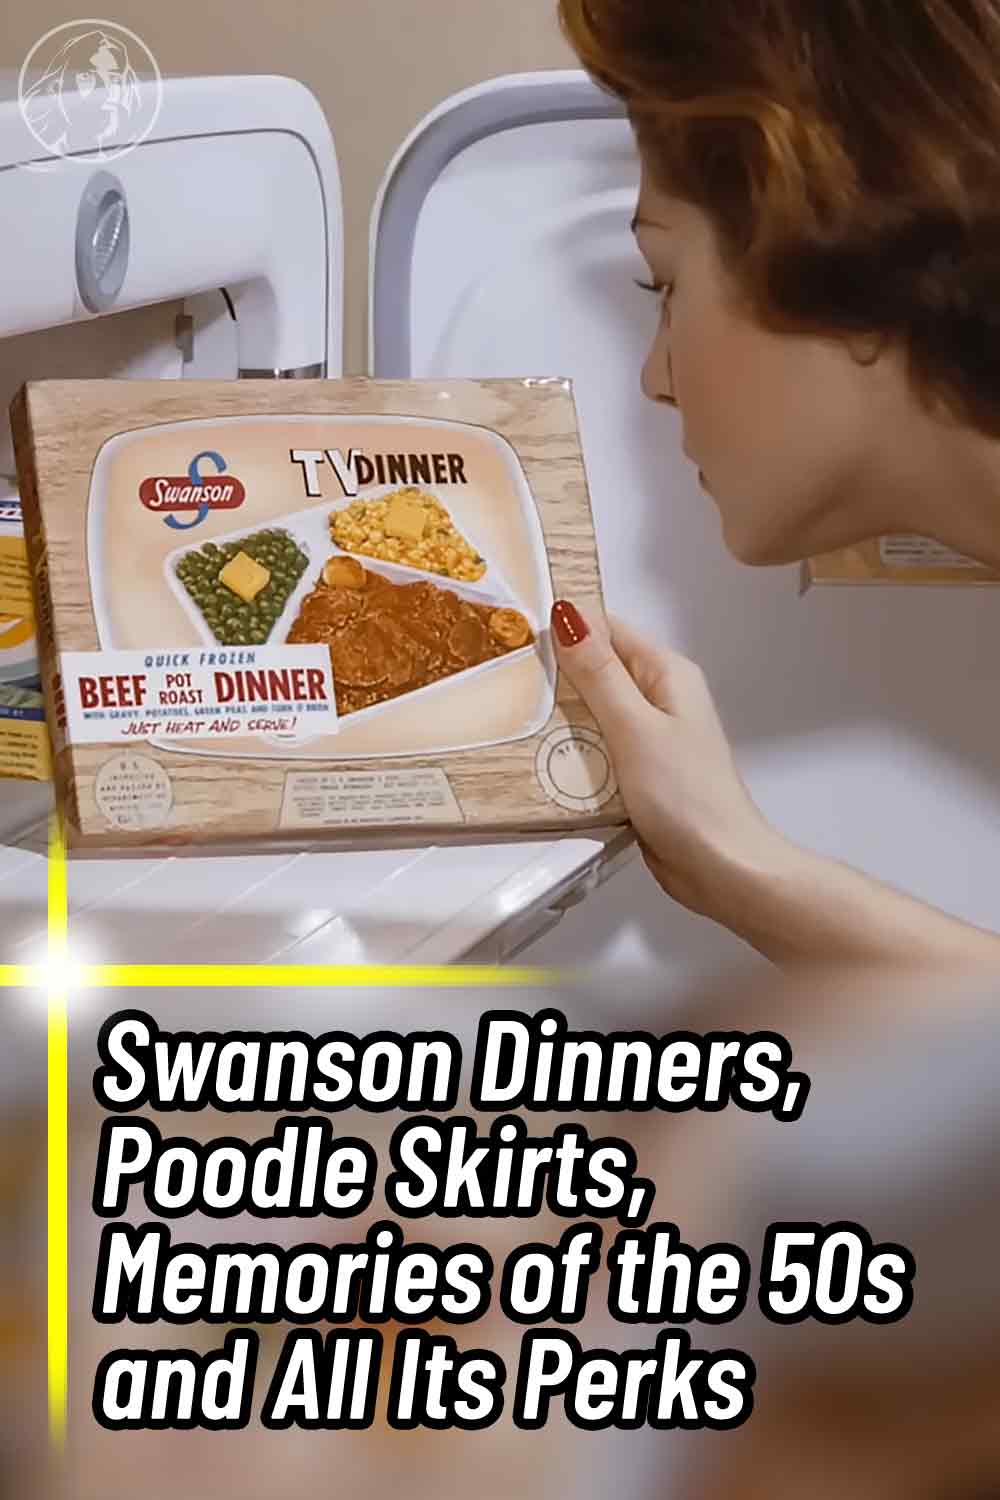 Swanson Dinners, Poodle Skirts, Memories of the 50s and All Its Perks